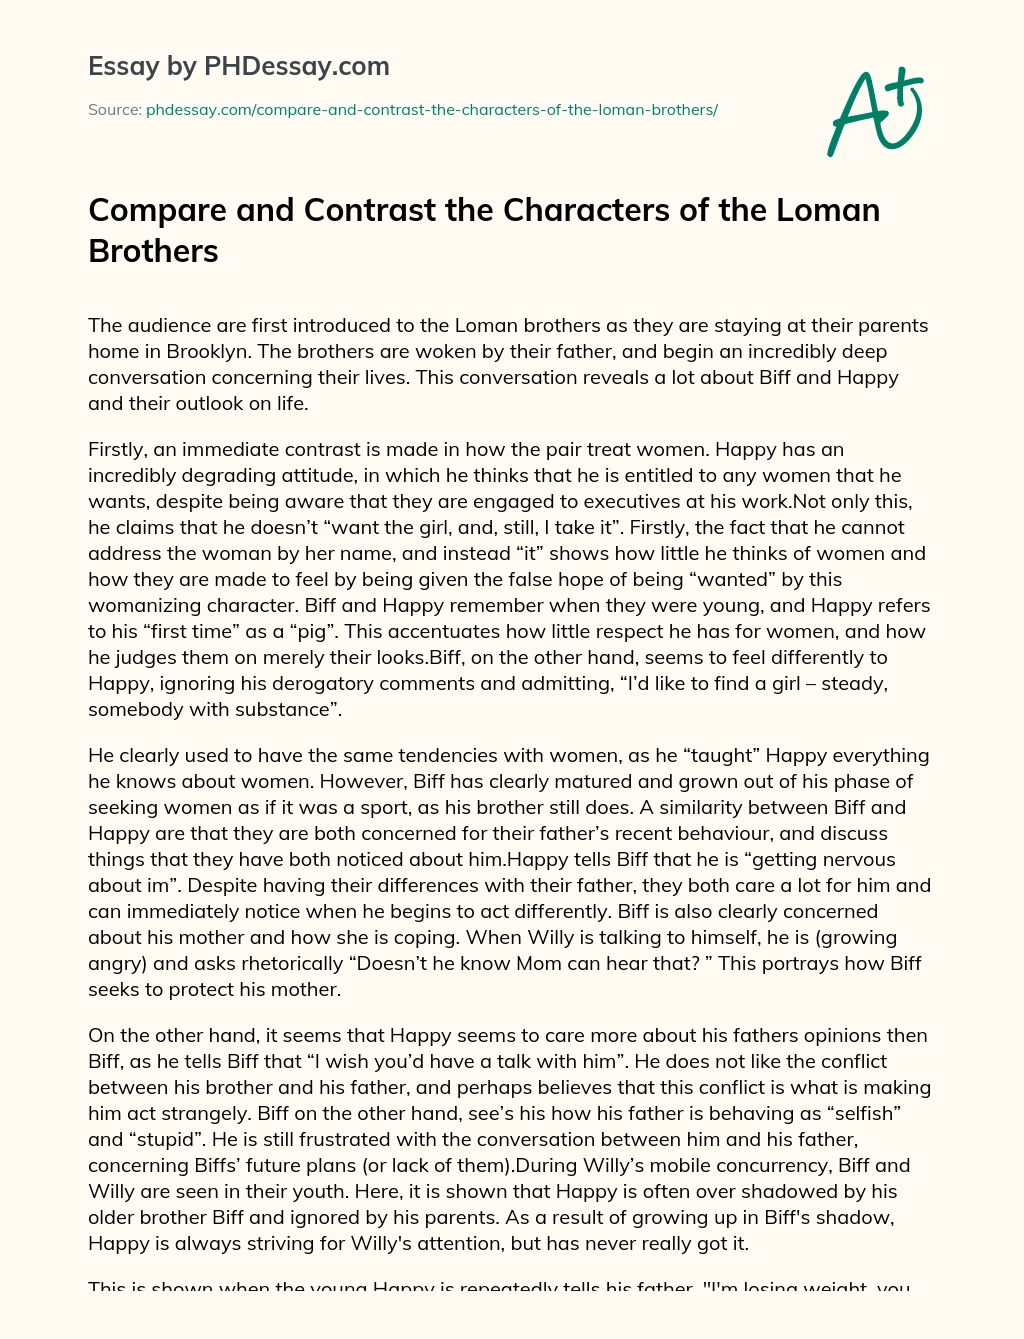 Compare and Contrast the Characters of the Loman Brothers essay